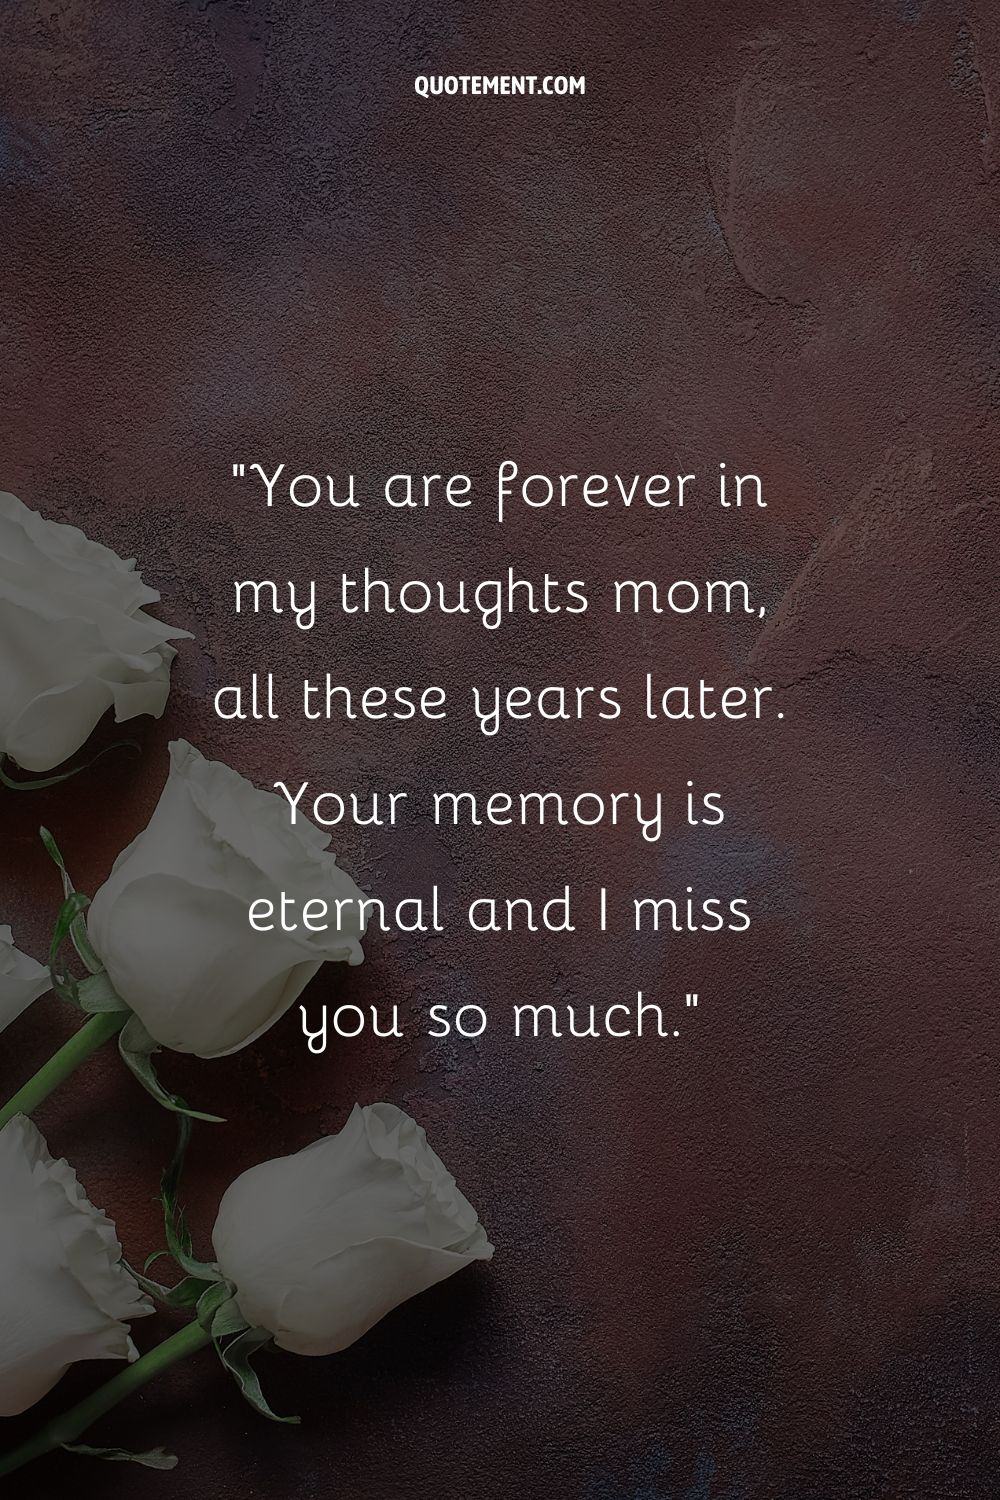 Prayer quote for the loss of a mother.